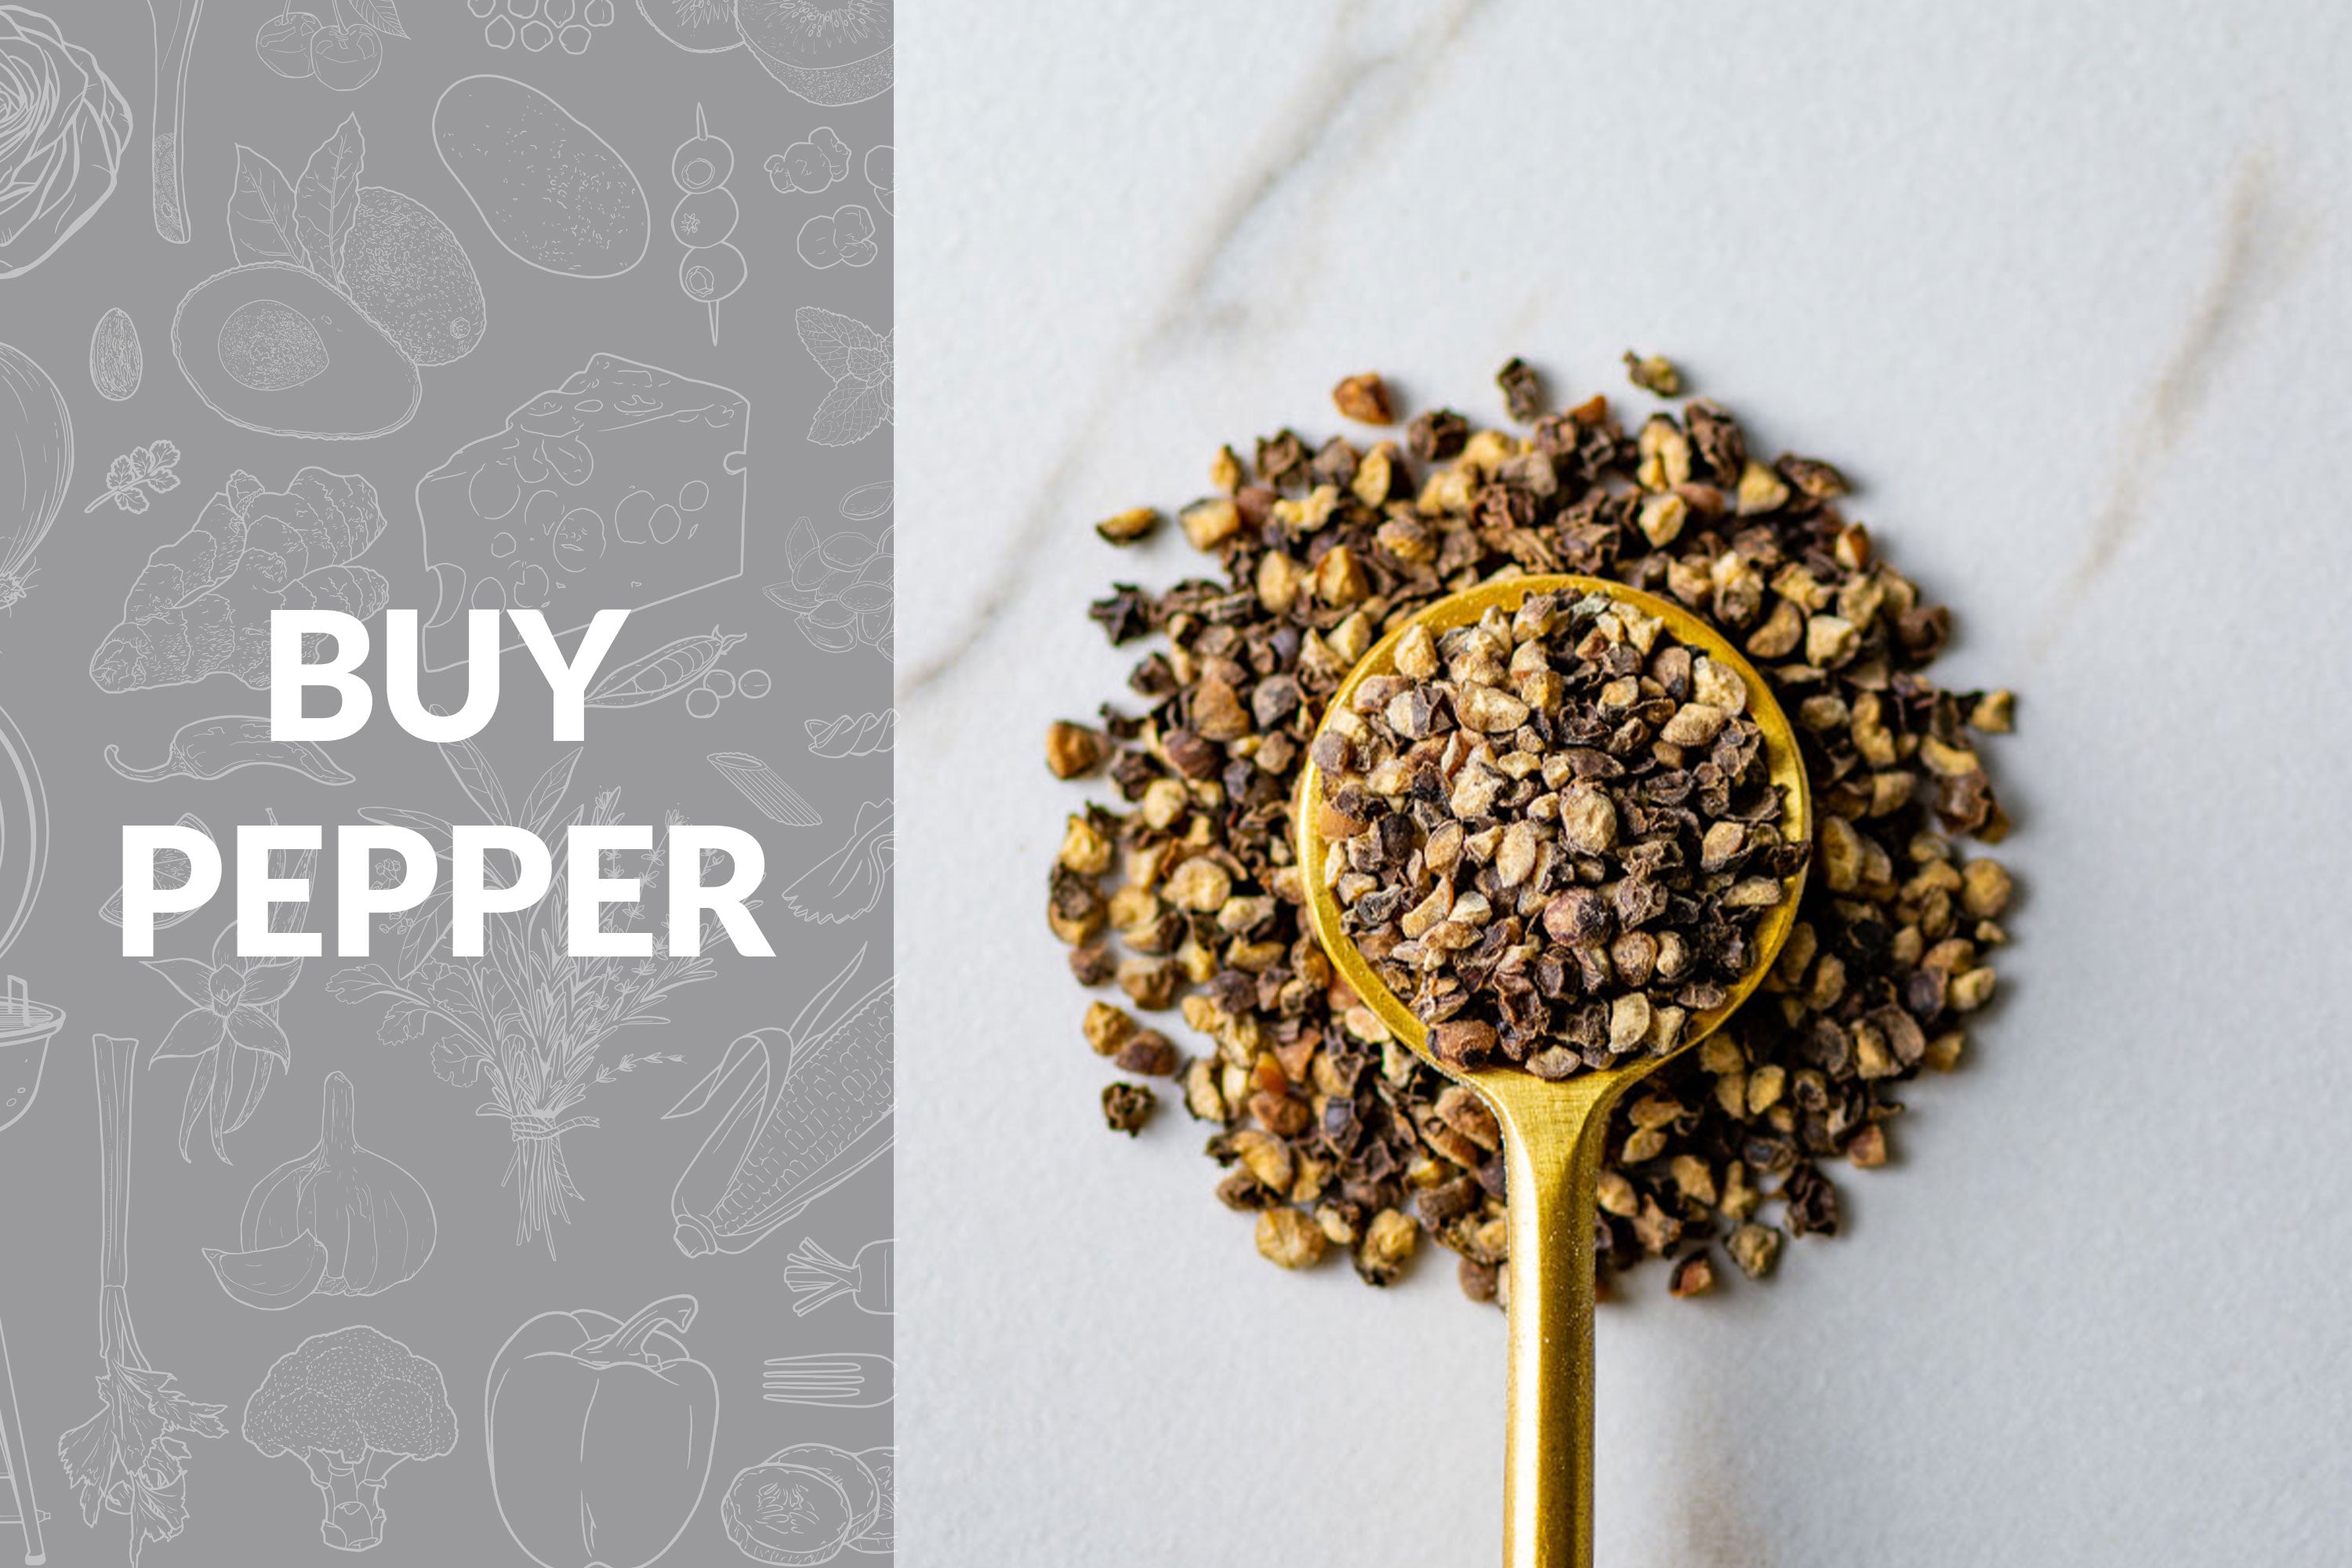 Buy Pepper on grey background with spoon of coarse black pepper on the right